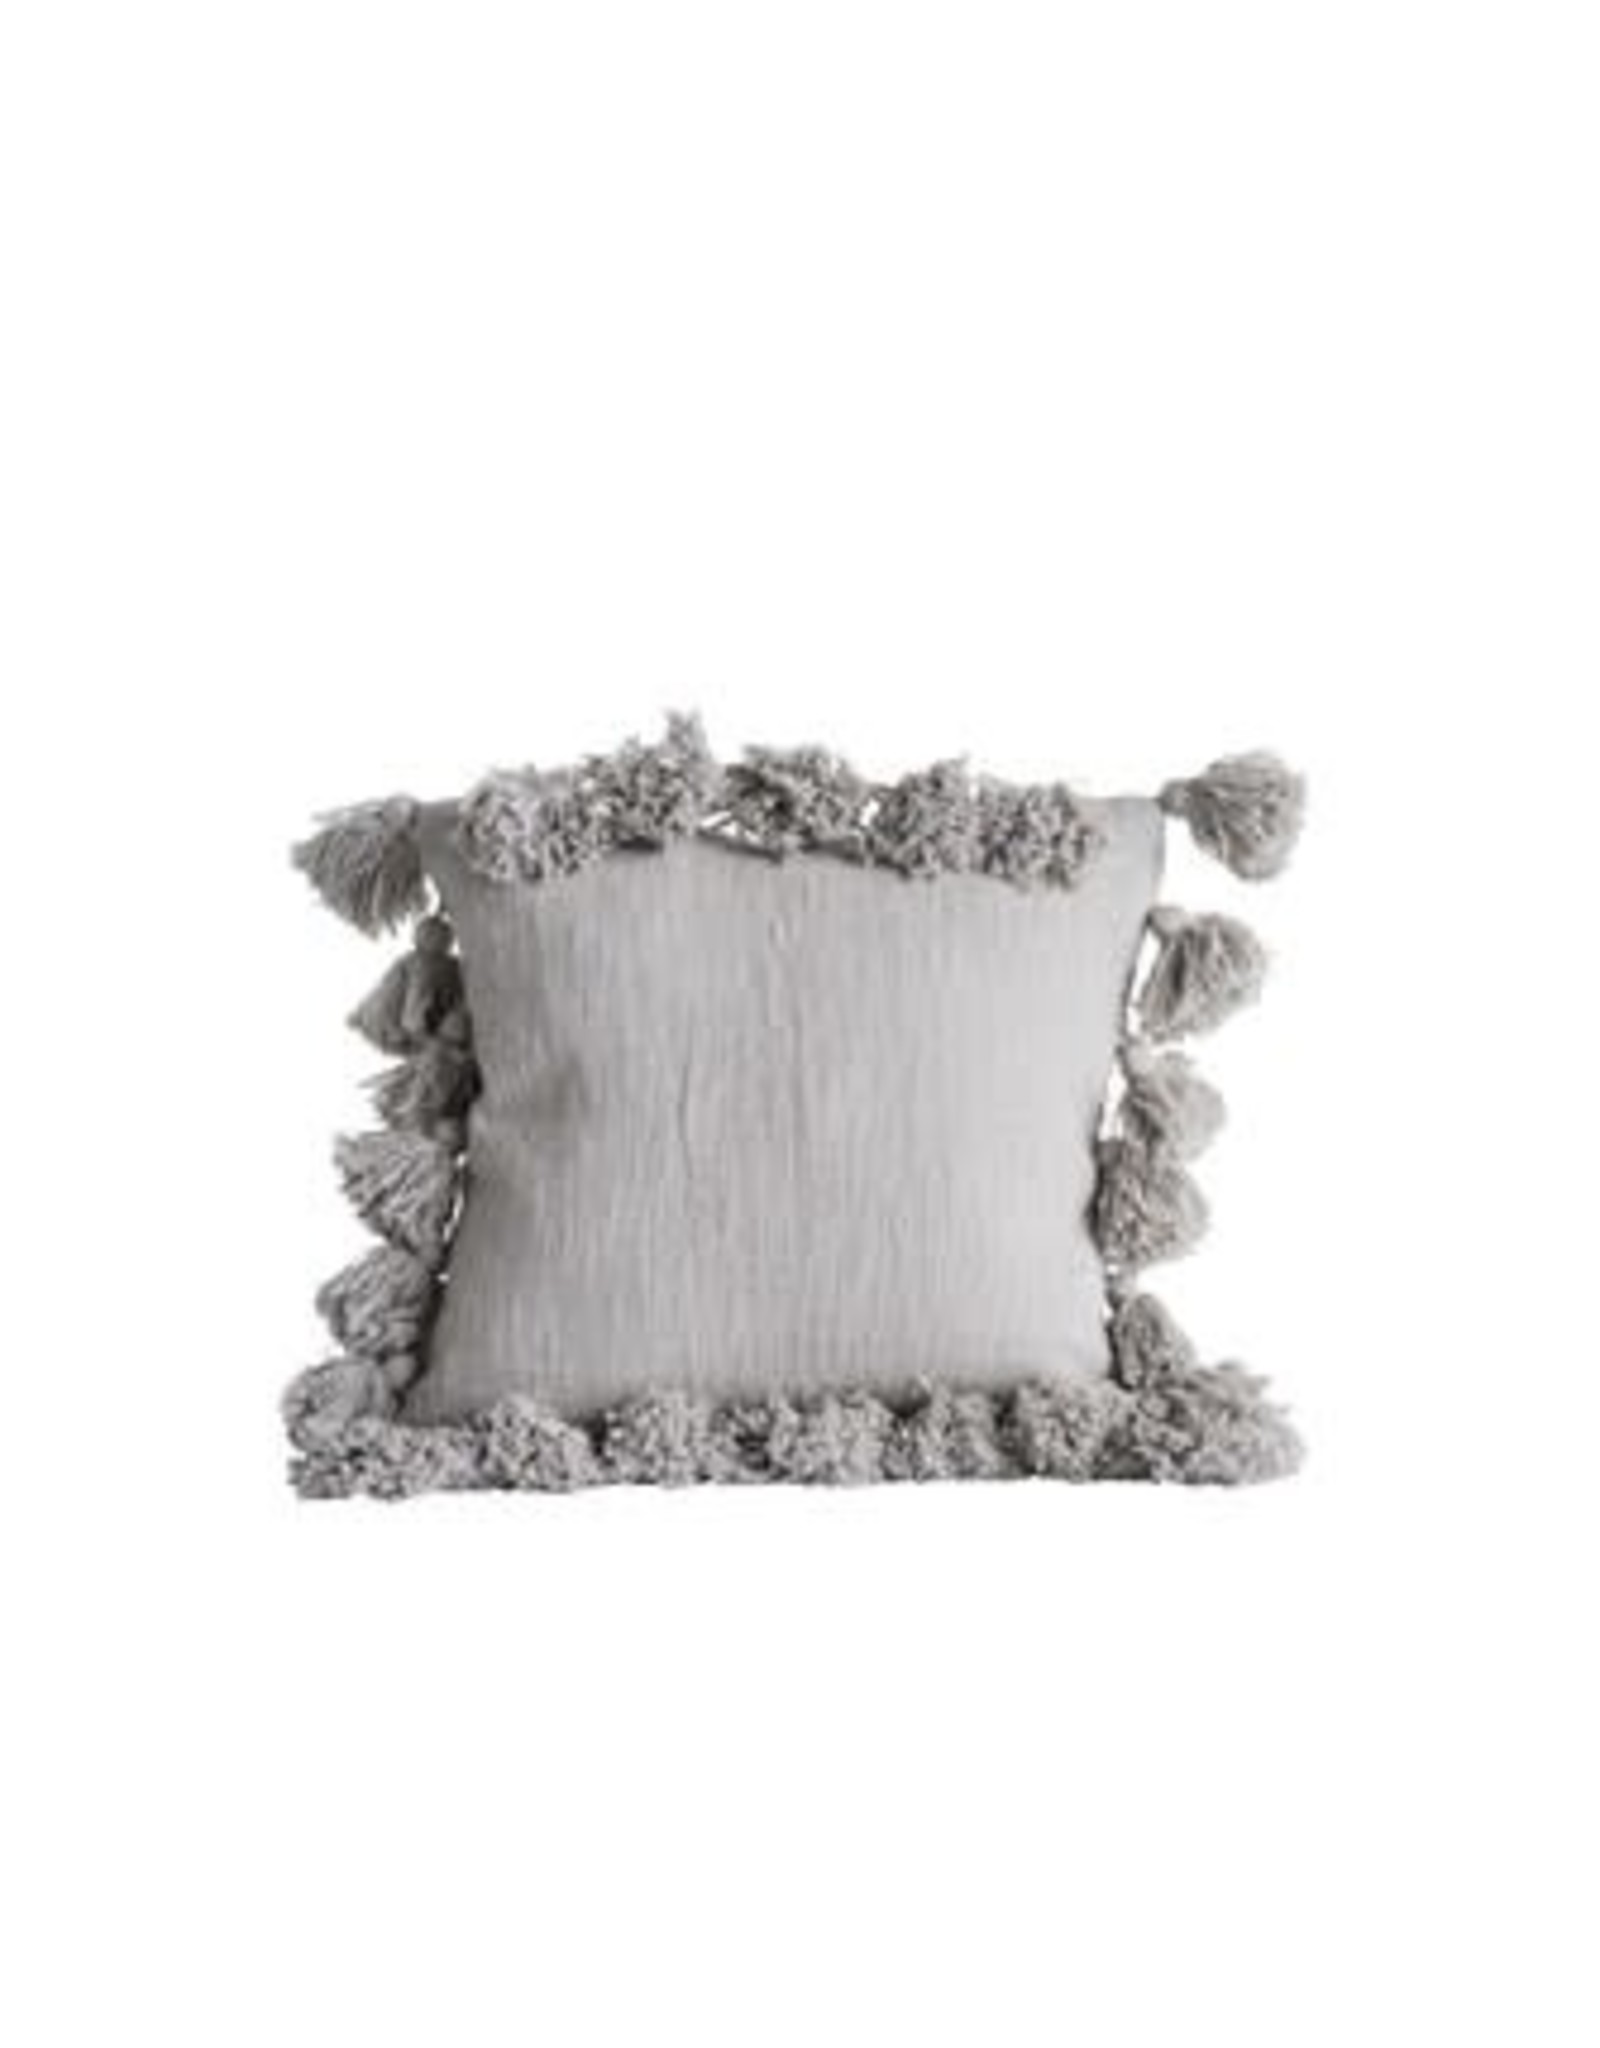 Creative Co-op 18" Square Pillow W/Fringe - Grey